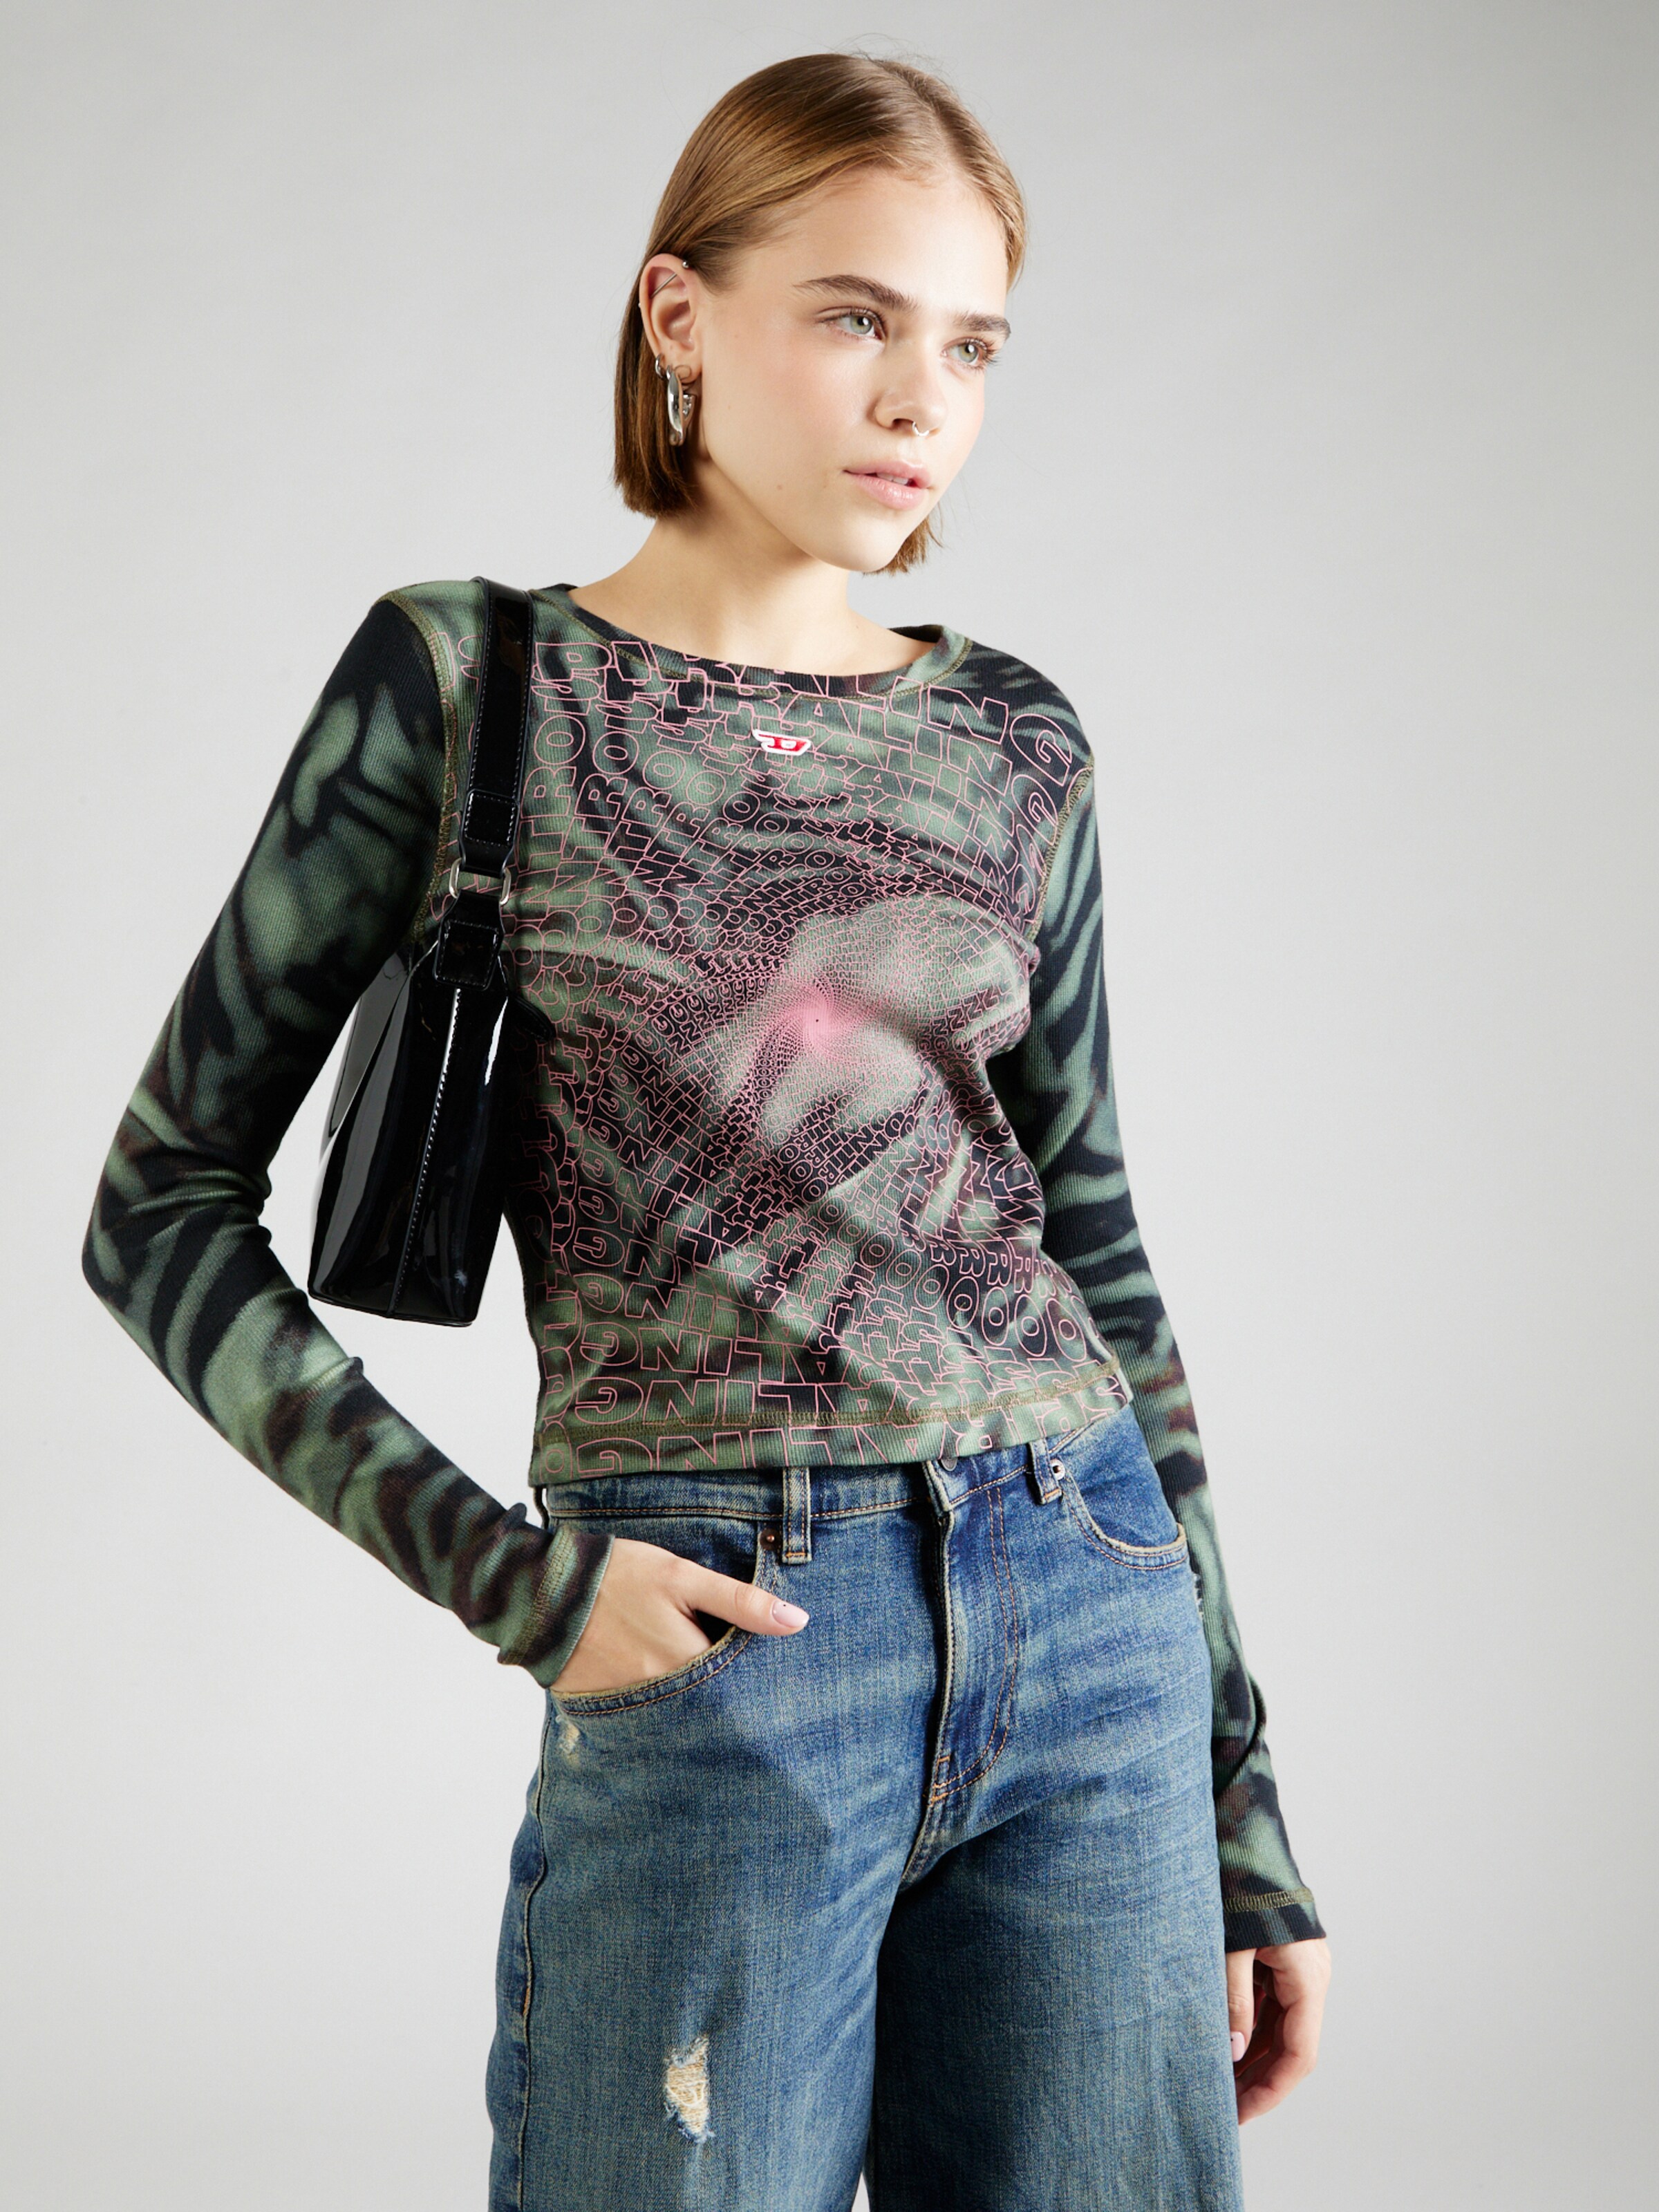 Women's New Arrivals: Jackets, Skirts, Jeans | Diesel® | Denim jacket women,  Denim women, Jackets